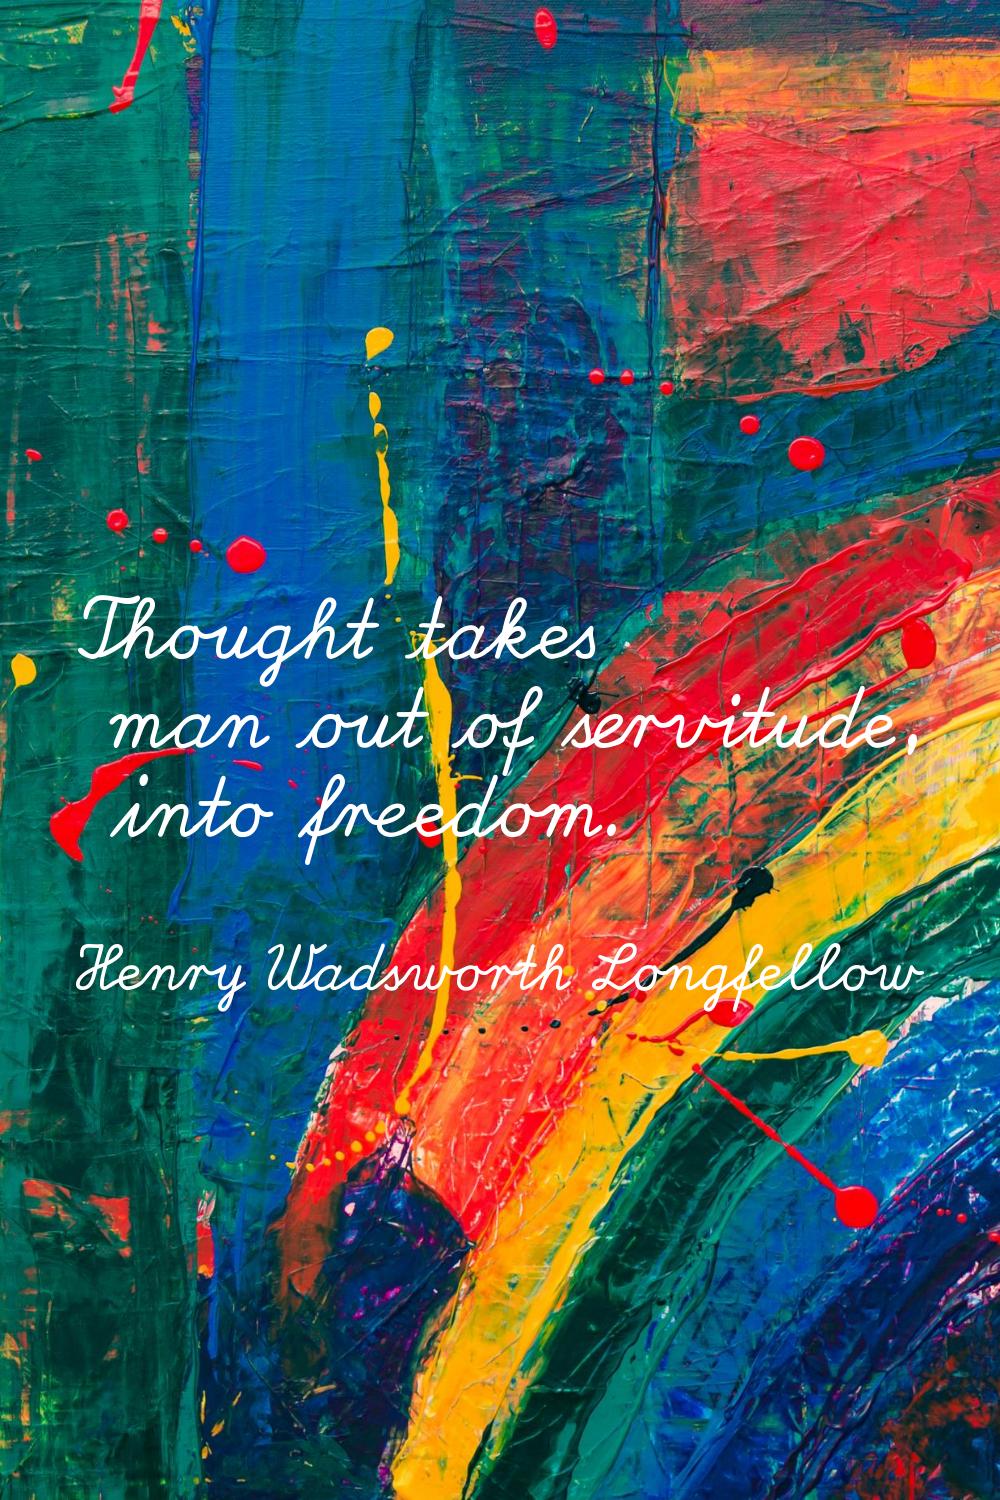 Thought takes man out of servitude, into freedom.